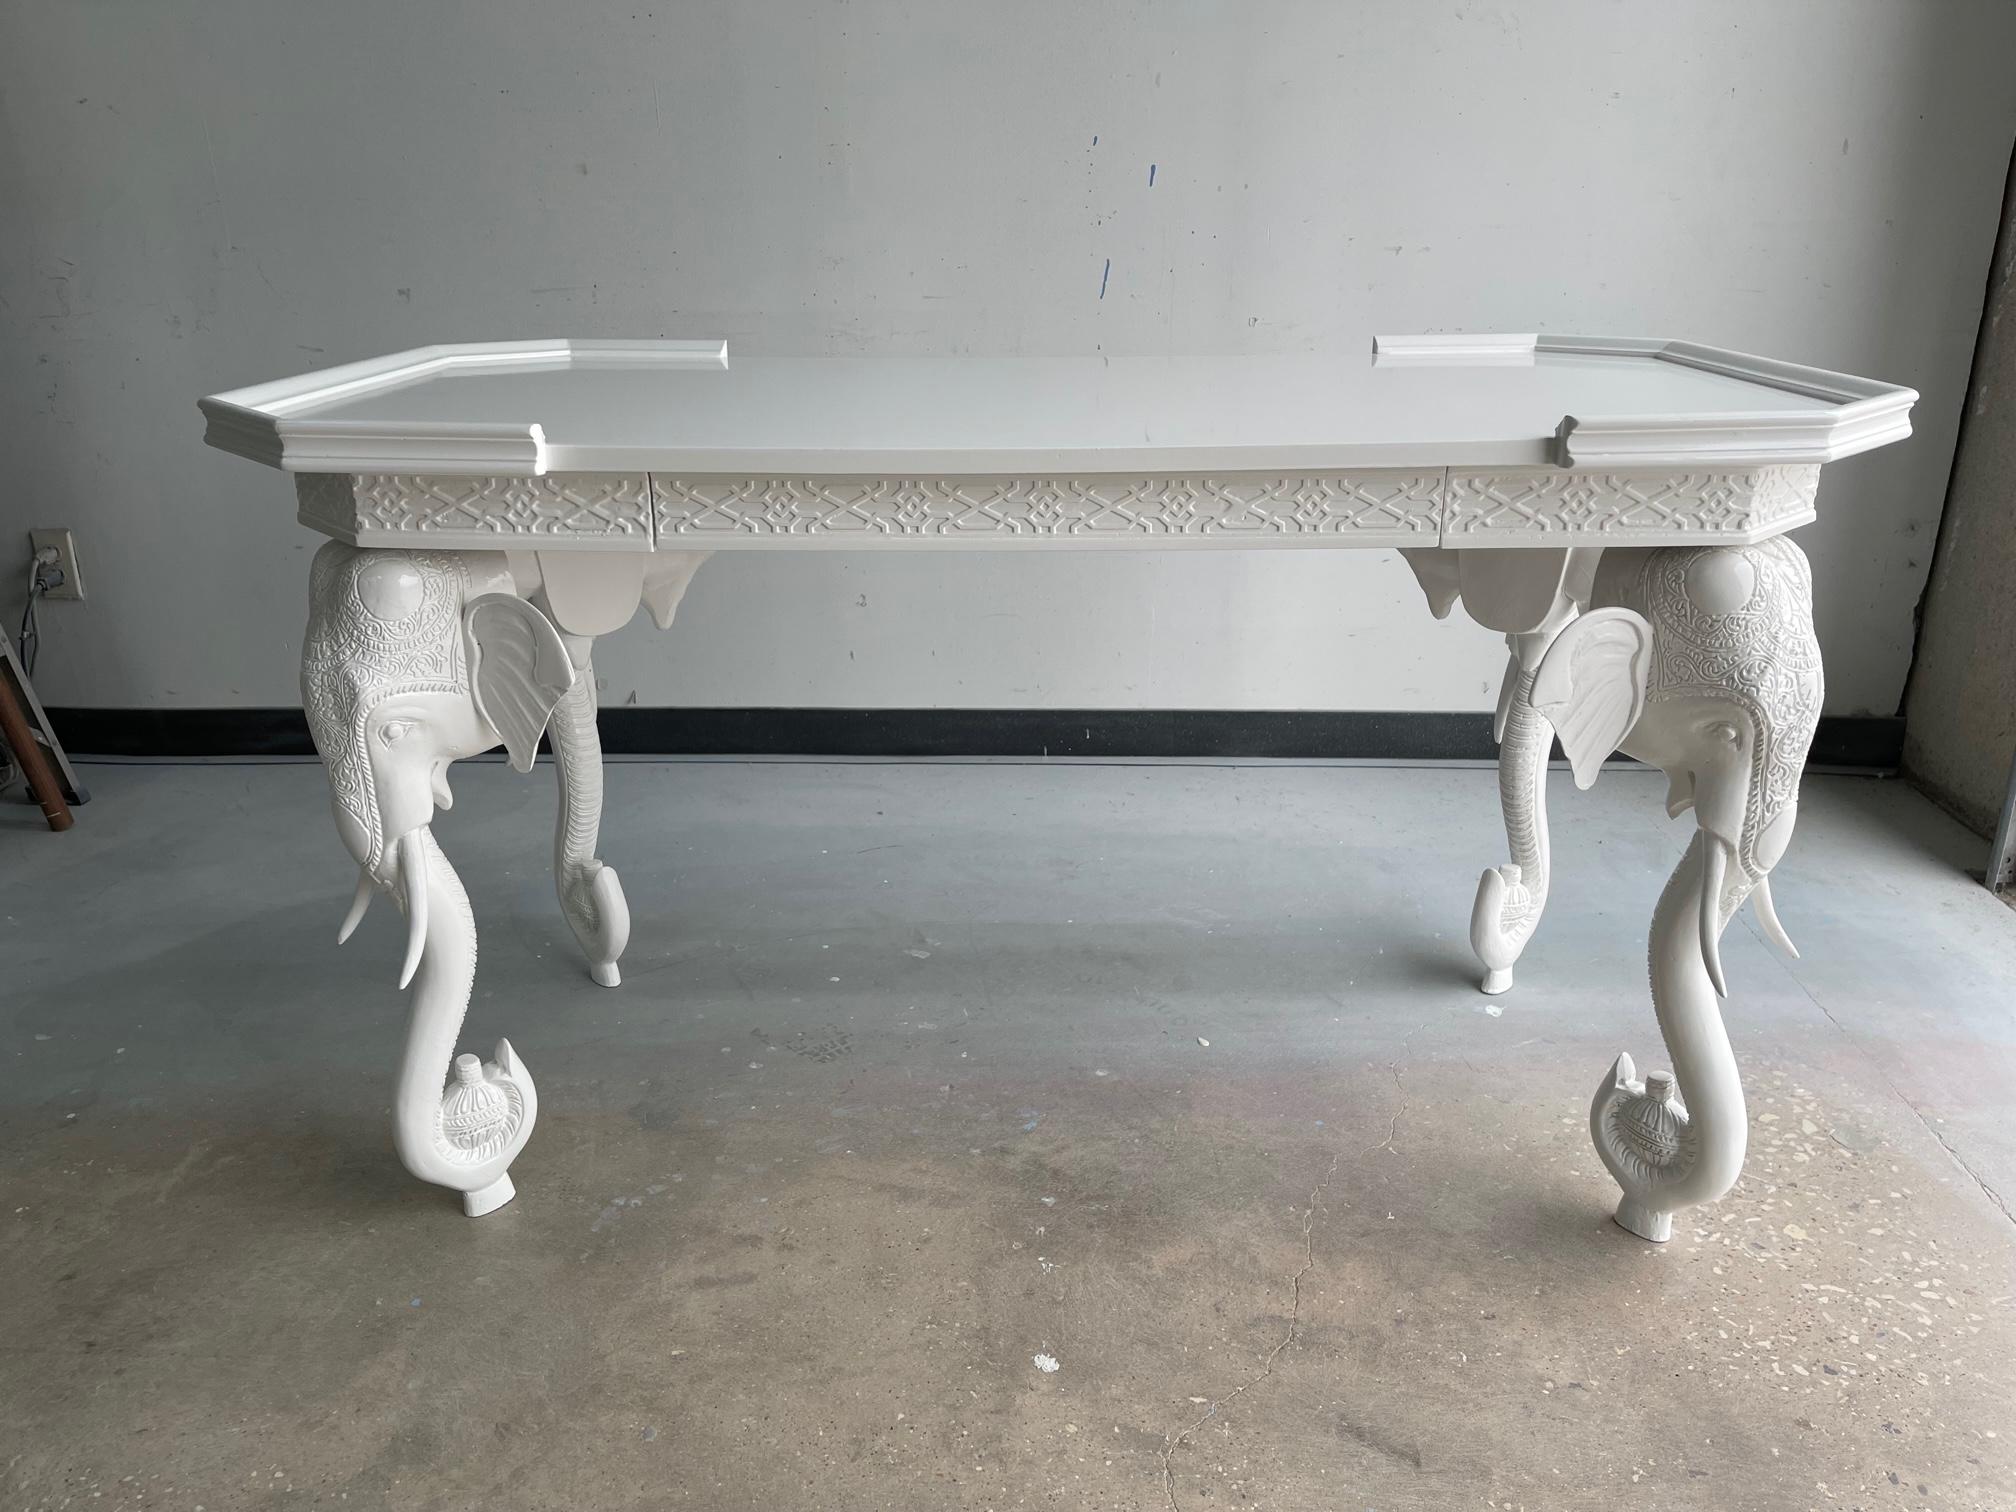 Hollywood Regency white lacquered desk or console by Gampel-Stoll. This stunning British colonial style desk or writing table is supported by four elephant heads with tusks and a hidden drawer. This versatile piece was professionally lacquered, can